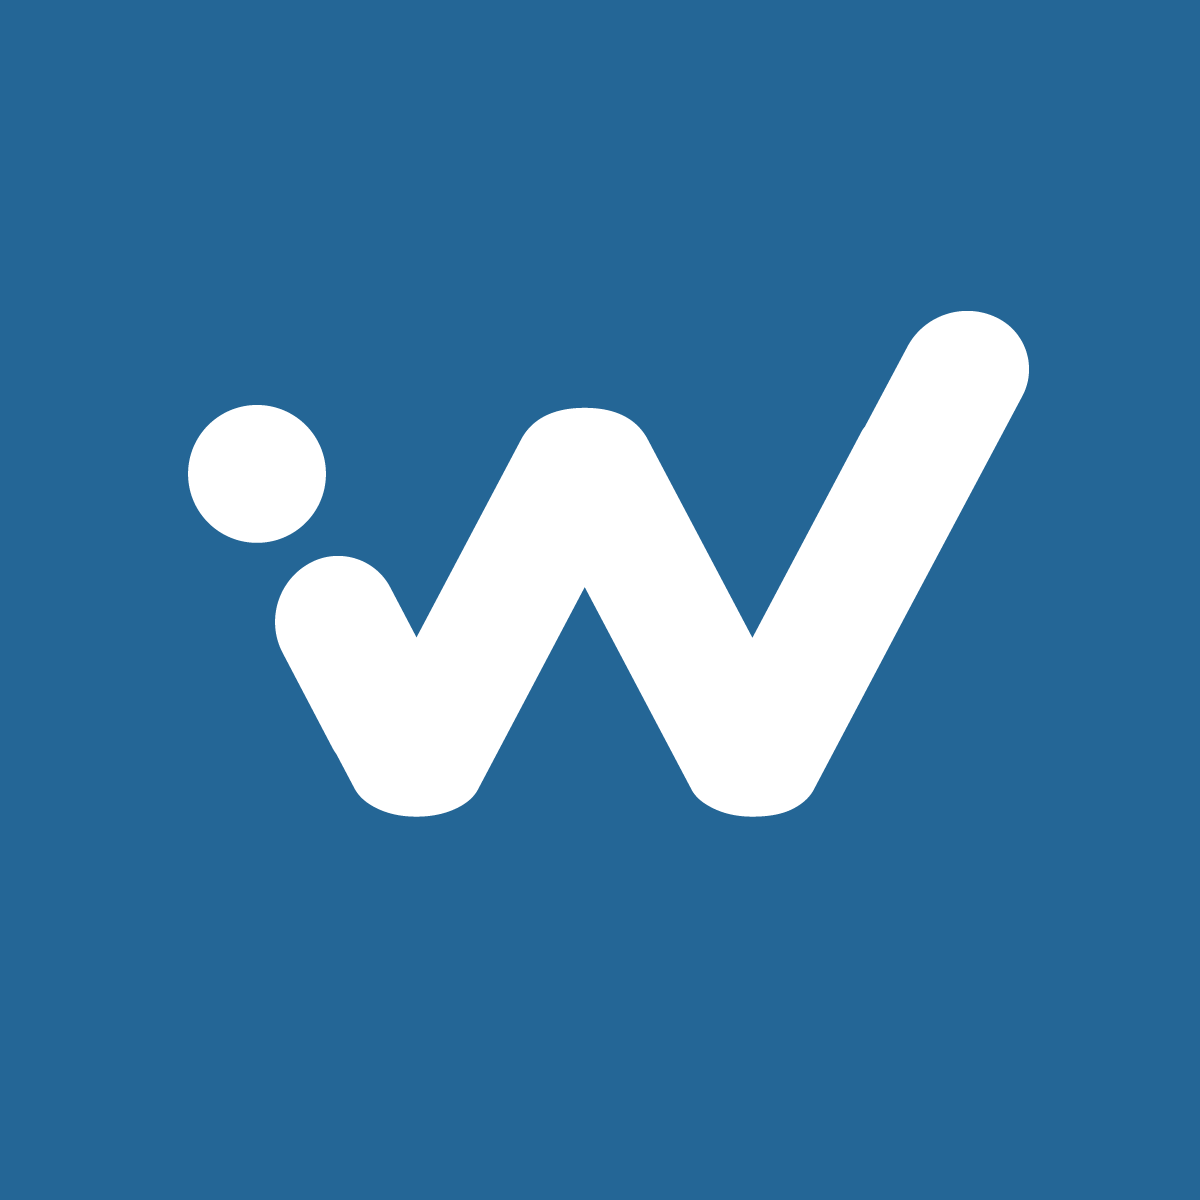 Wask Marketing for Shopify